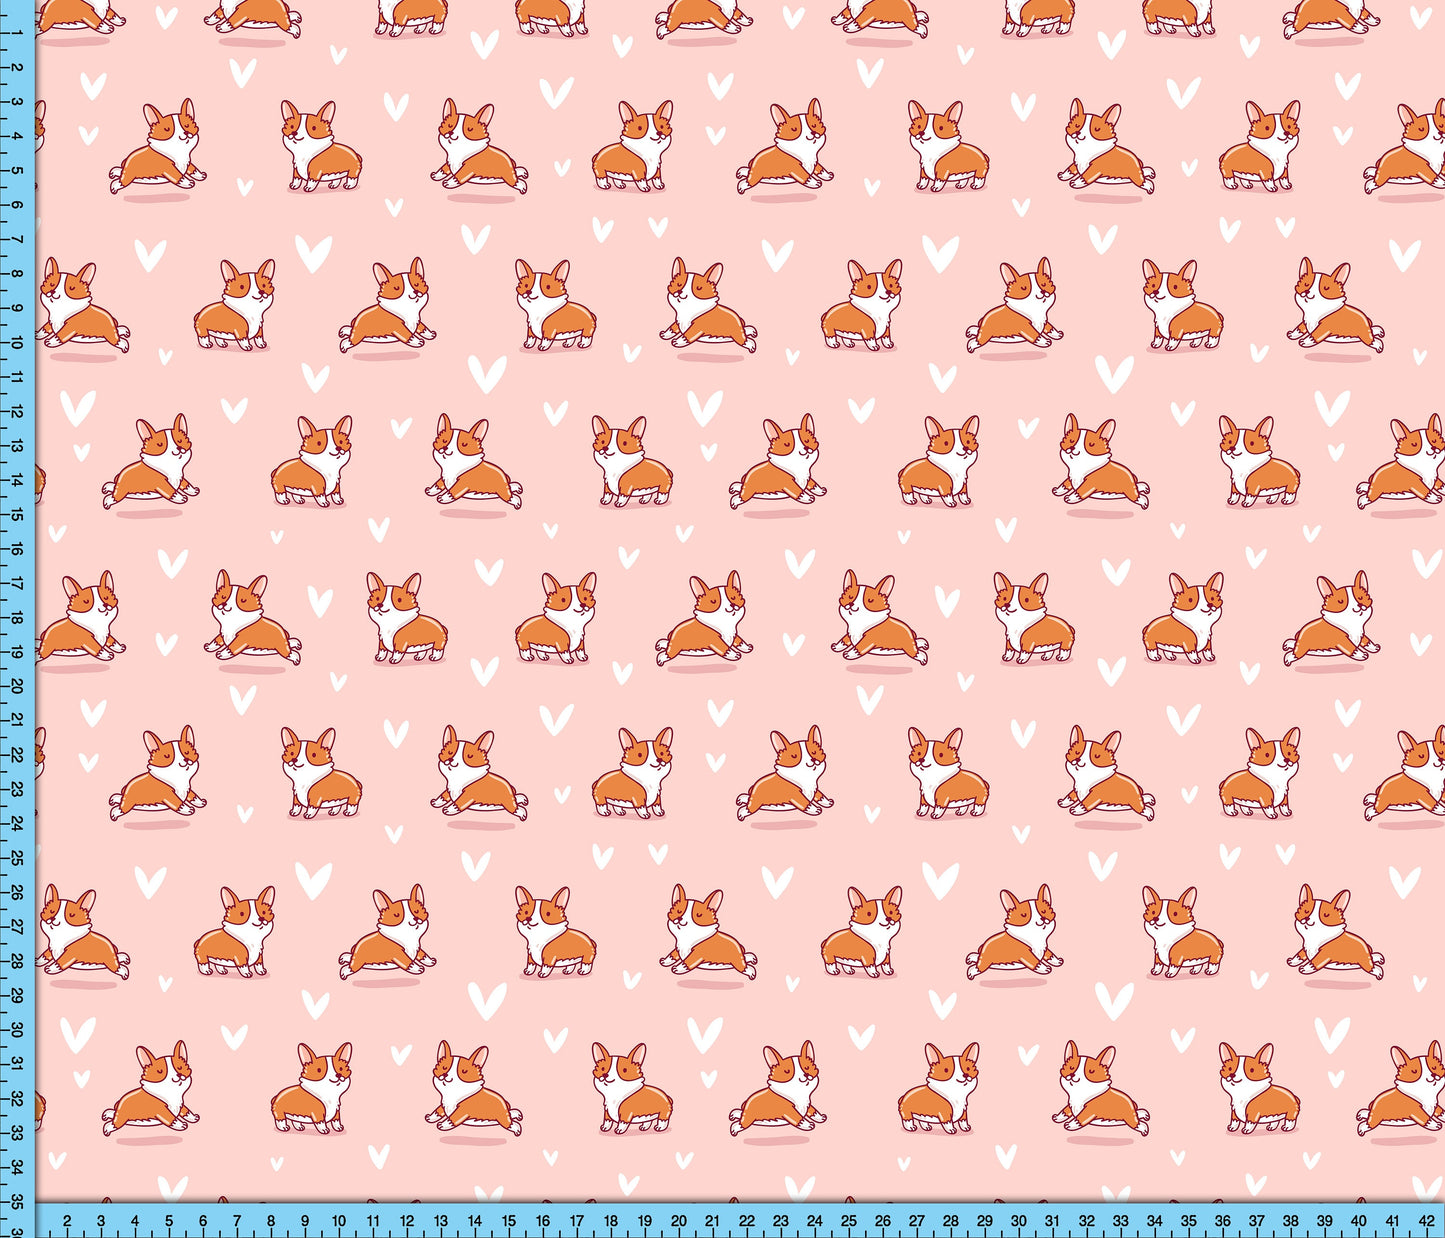 Corgi Dog Fabric By The Yard, Pink background design Custom Printed on the fabric of your choice